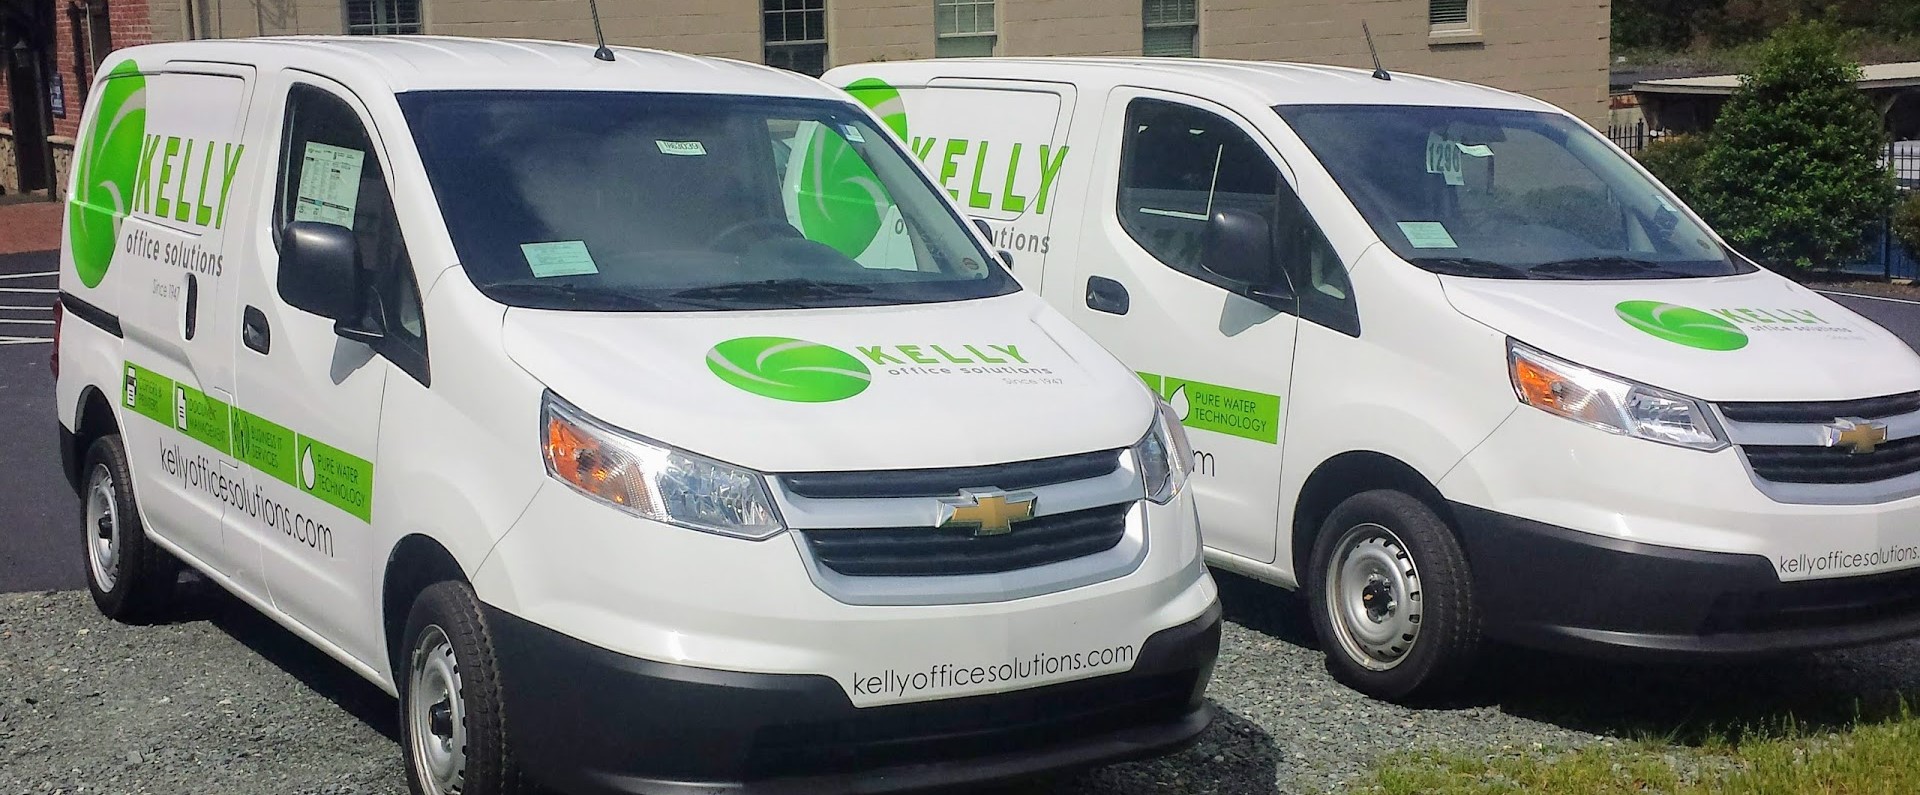 kelly office solutions cars wrap